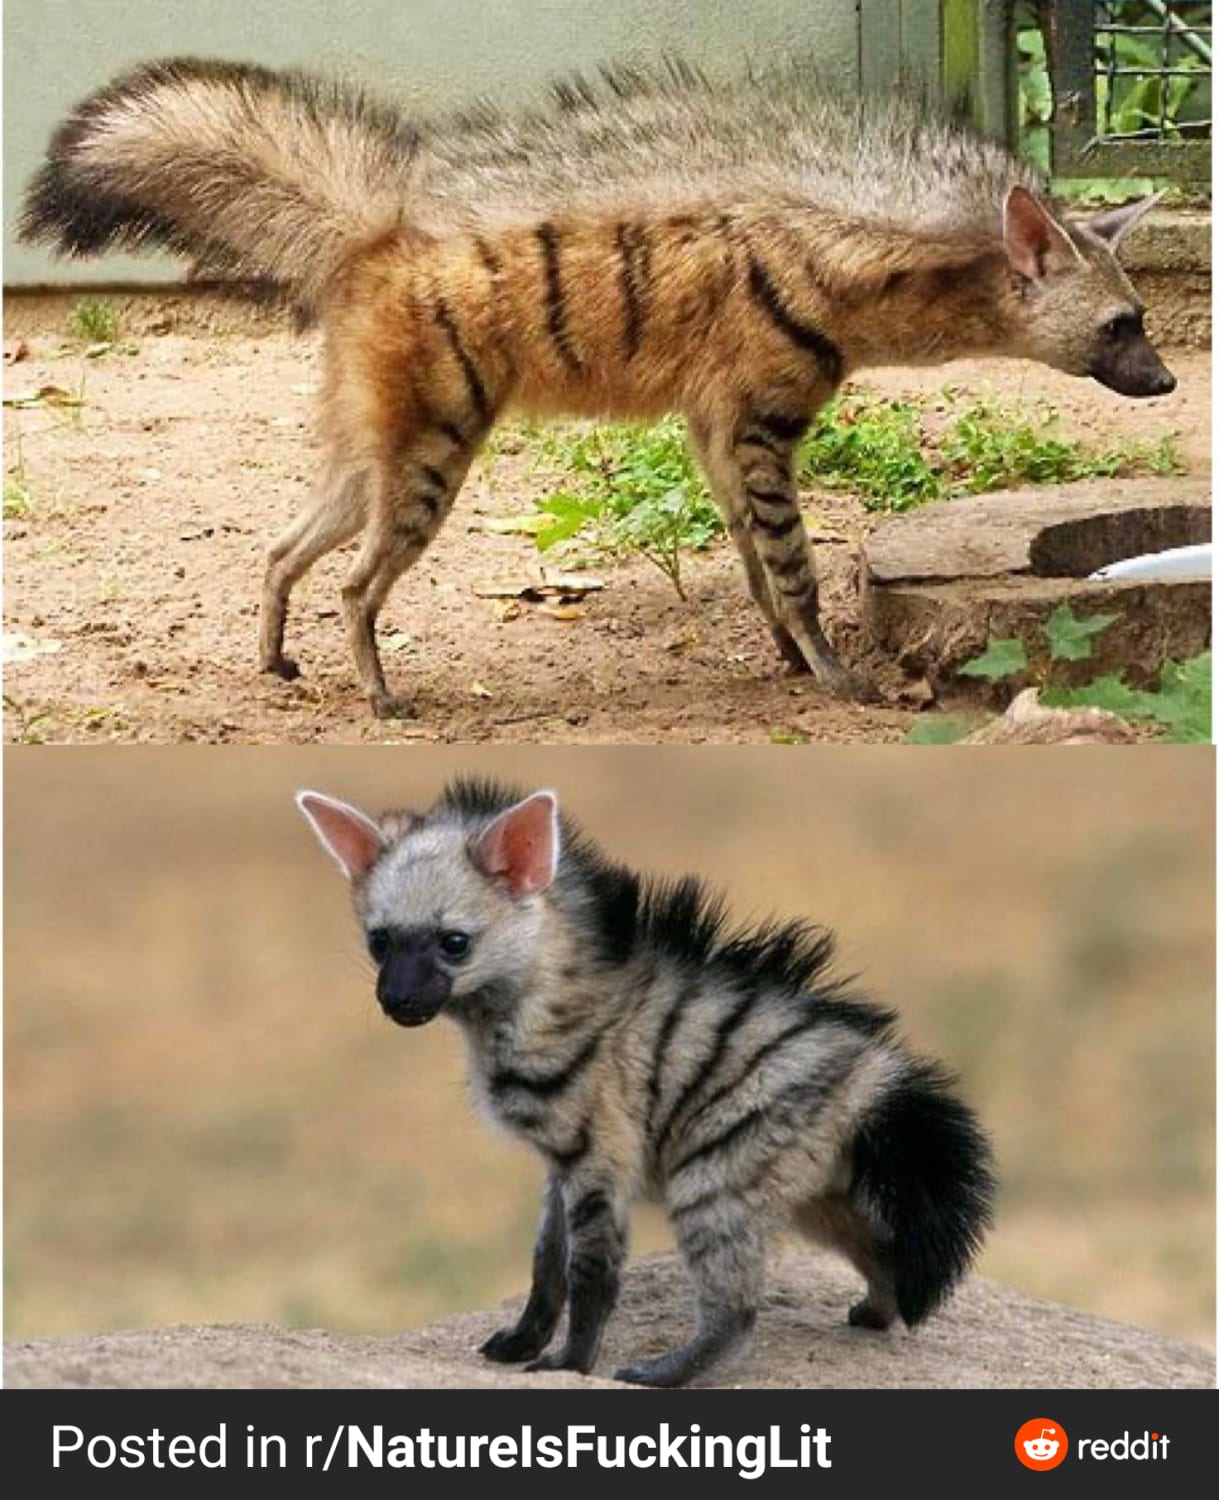 The Aardwolf is in the same family as the hyenas. They eat insects, (mainly termites). One aardwolf can eat about 250,000 termites during a single night using its sticky tongue!